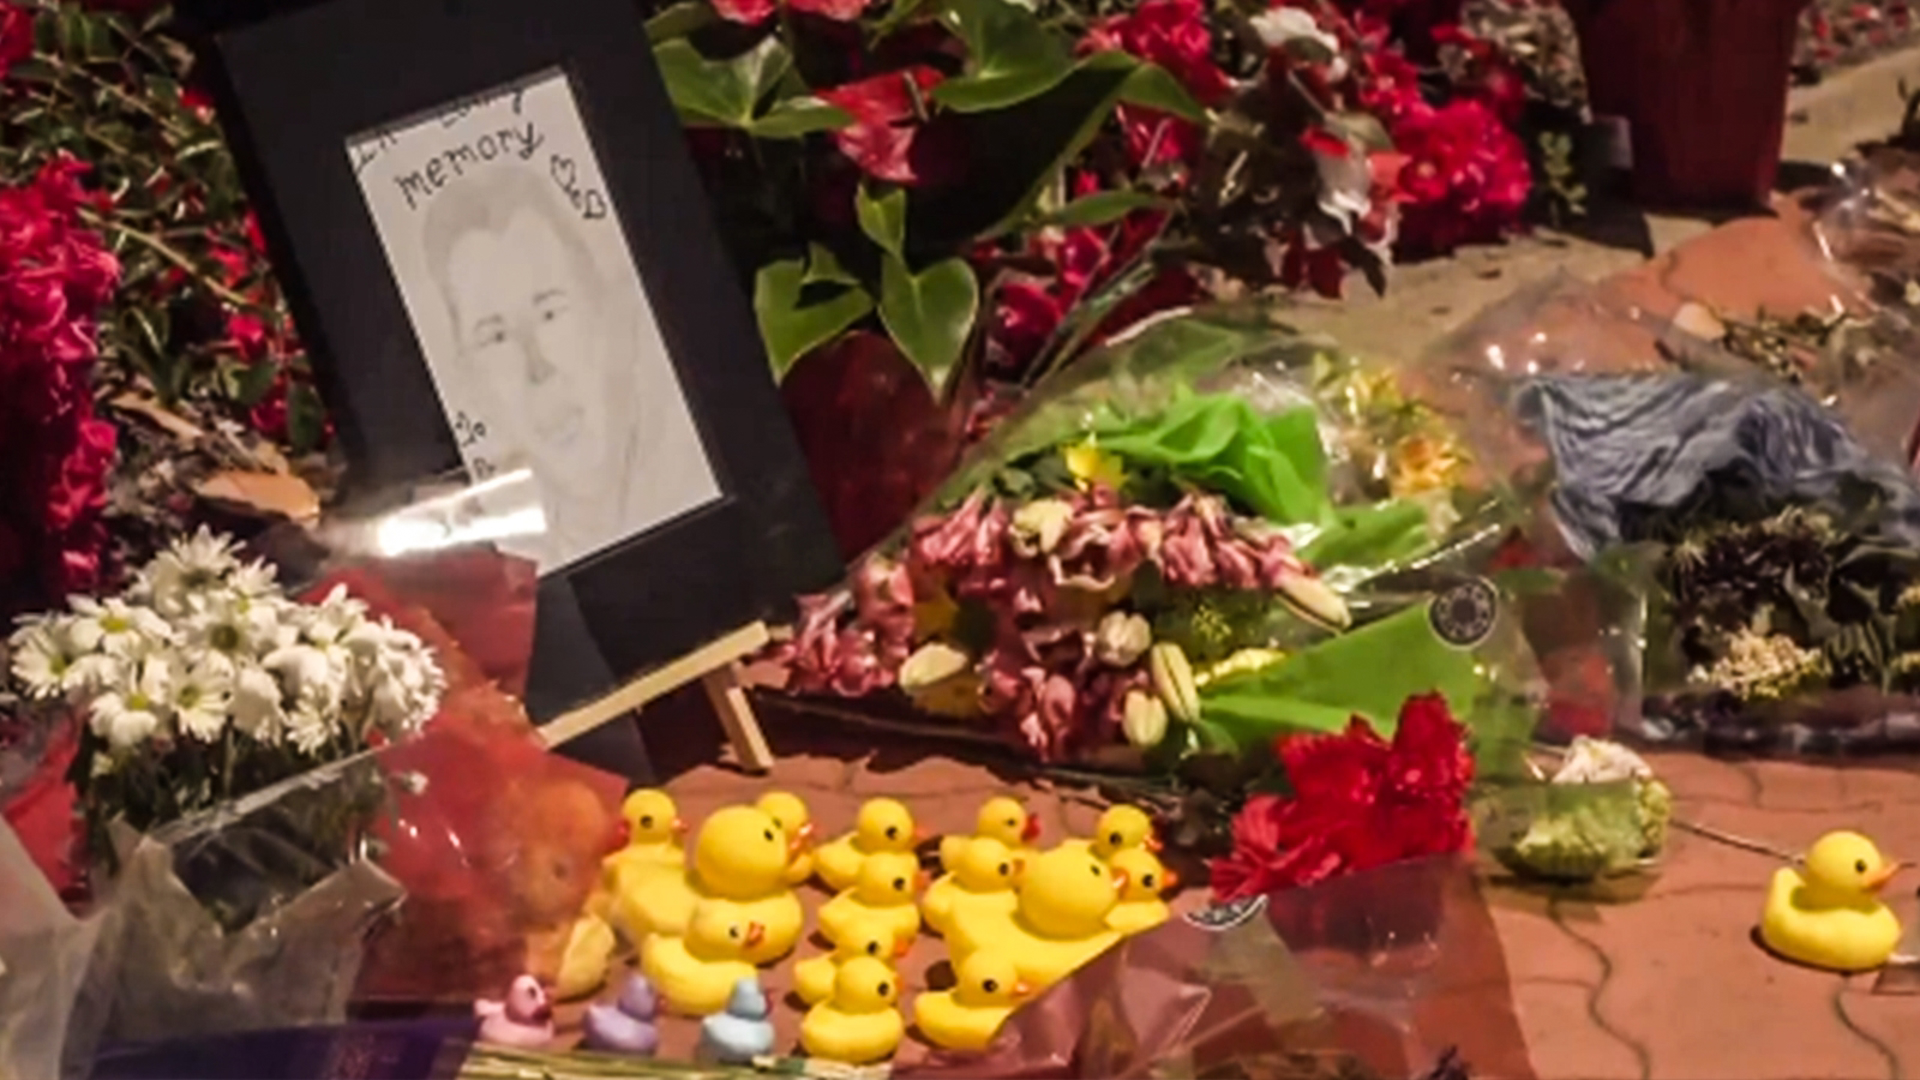 People are calling Casey Rivara a hero, and there’s a growing memorial where people are leaving behind flowers and dozens of rubber ducks to remember him.